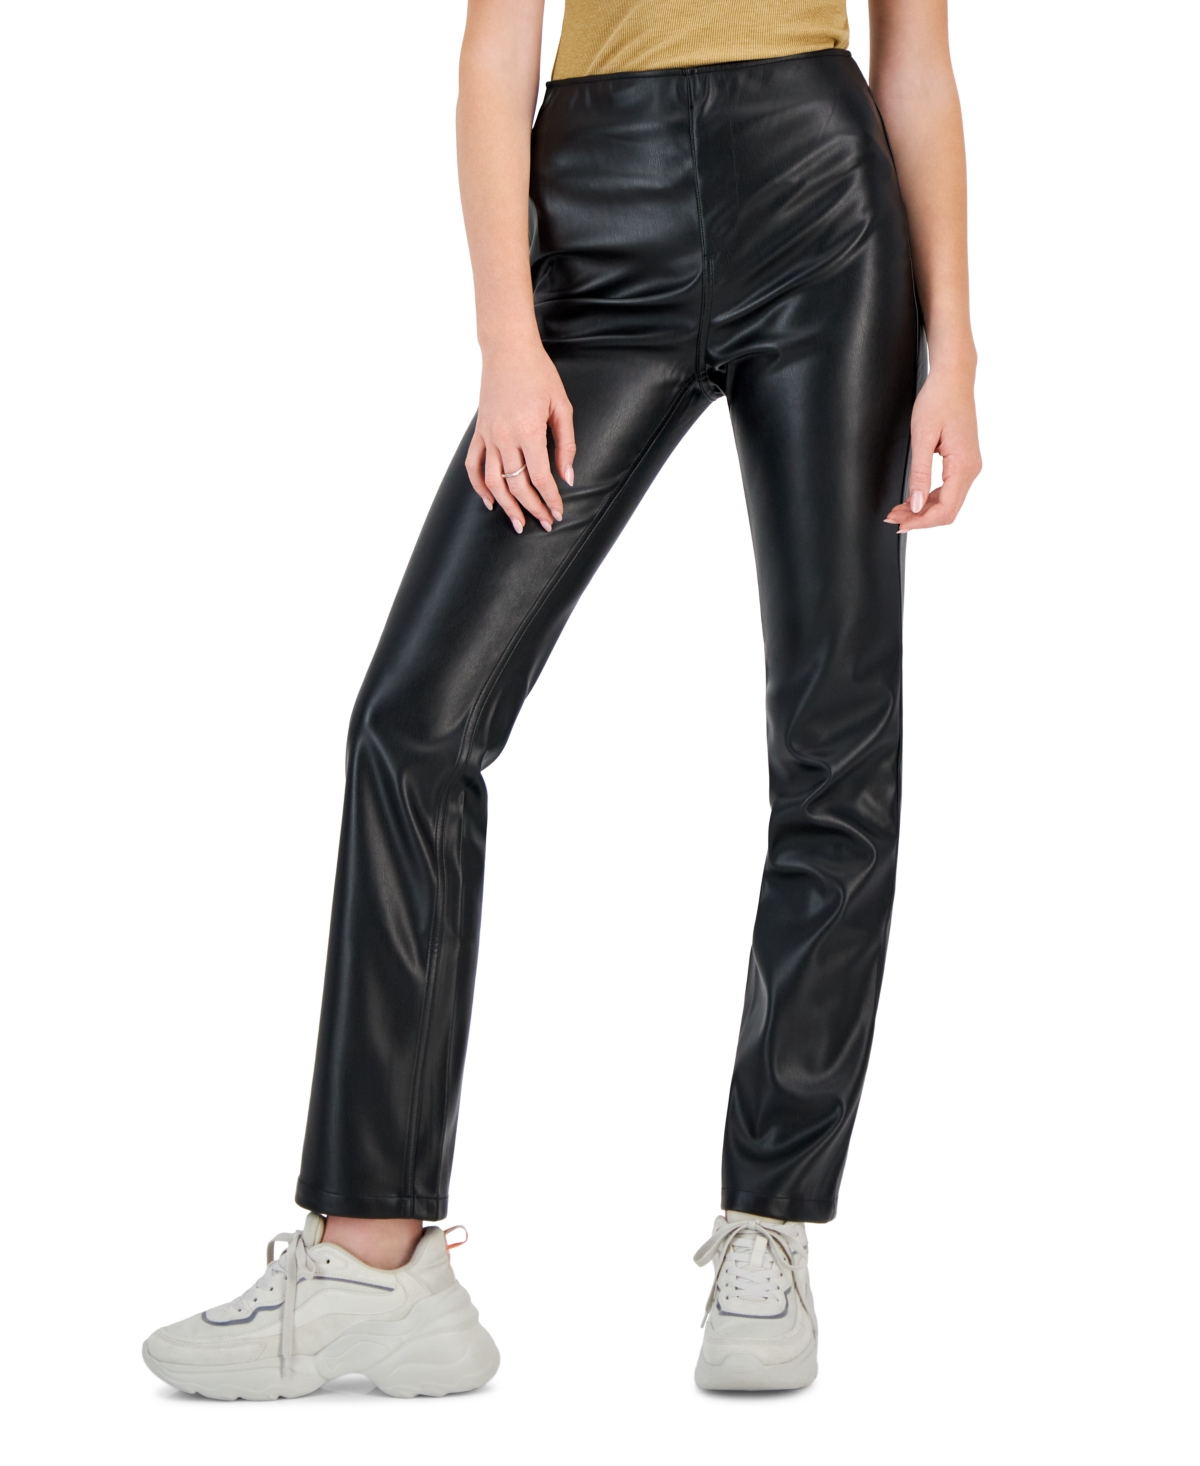 Juniors' Faux Leather High-Rise Pull-On Pants - Black